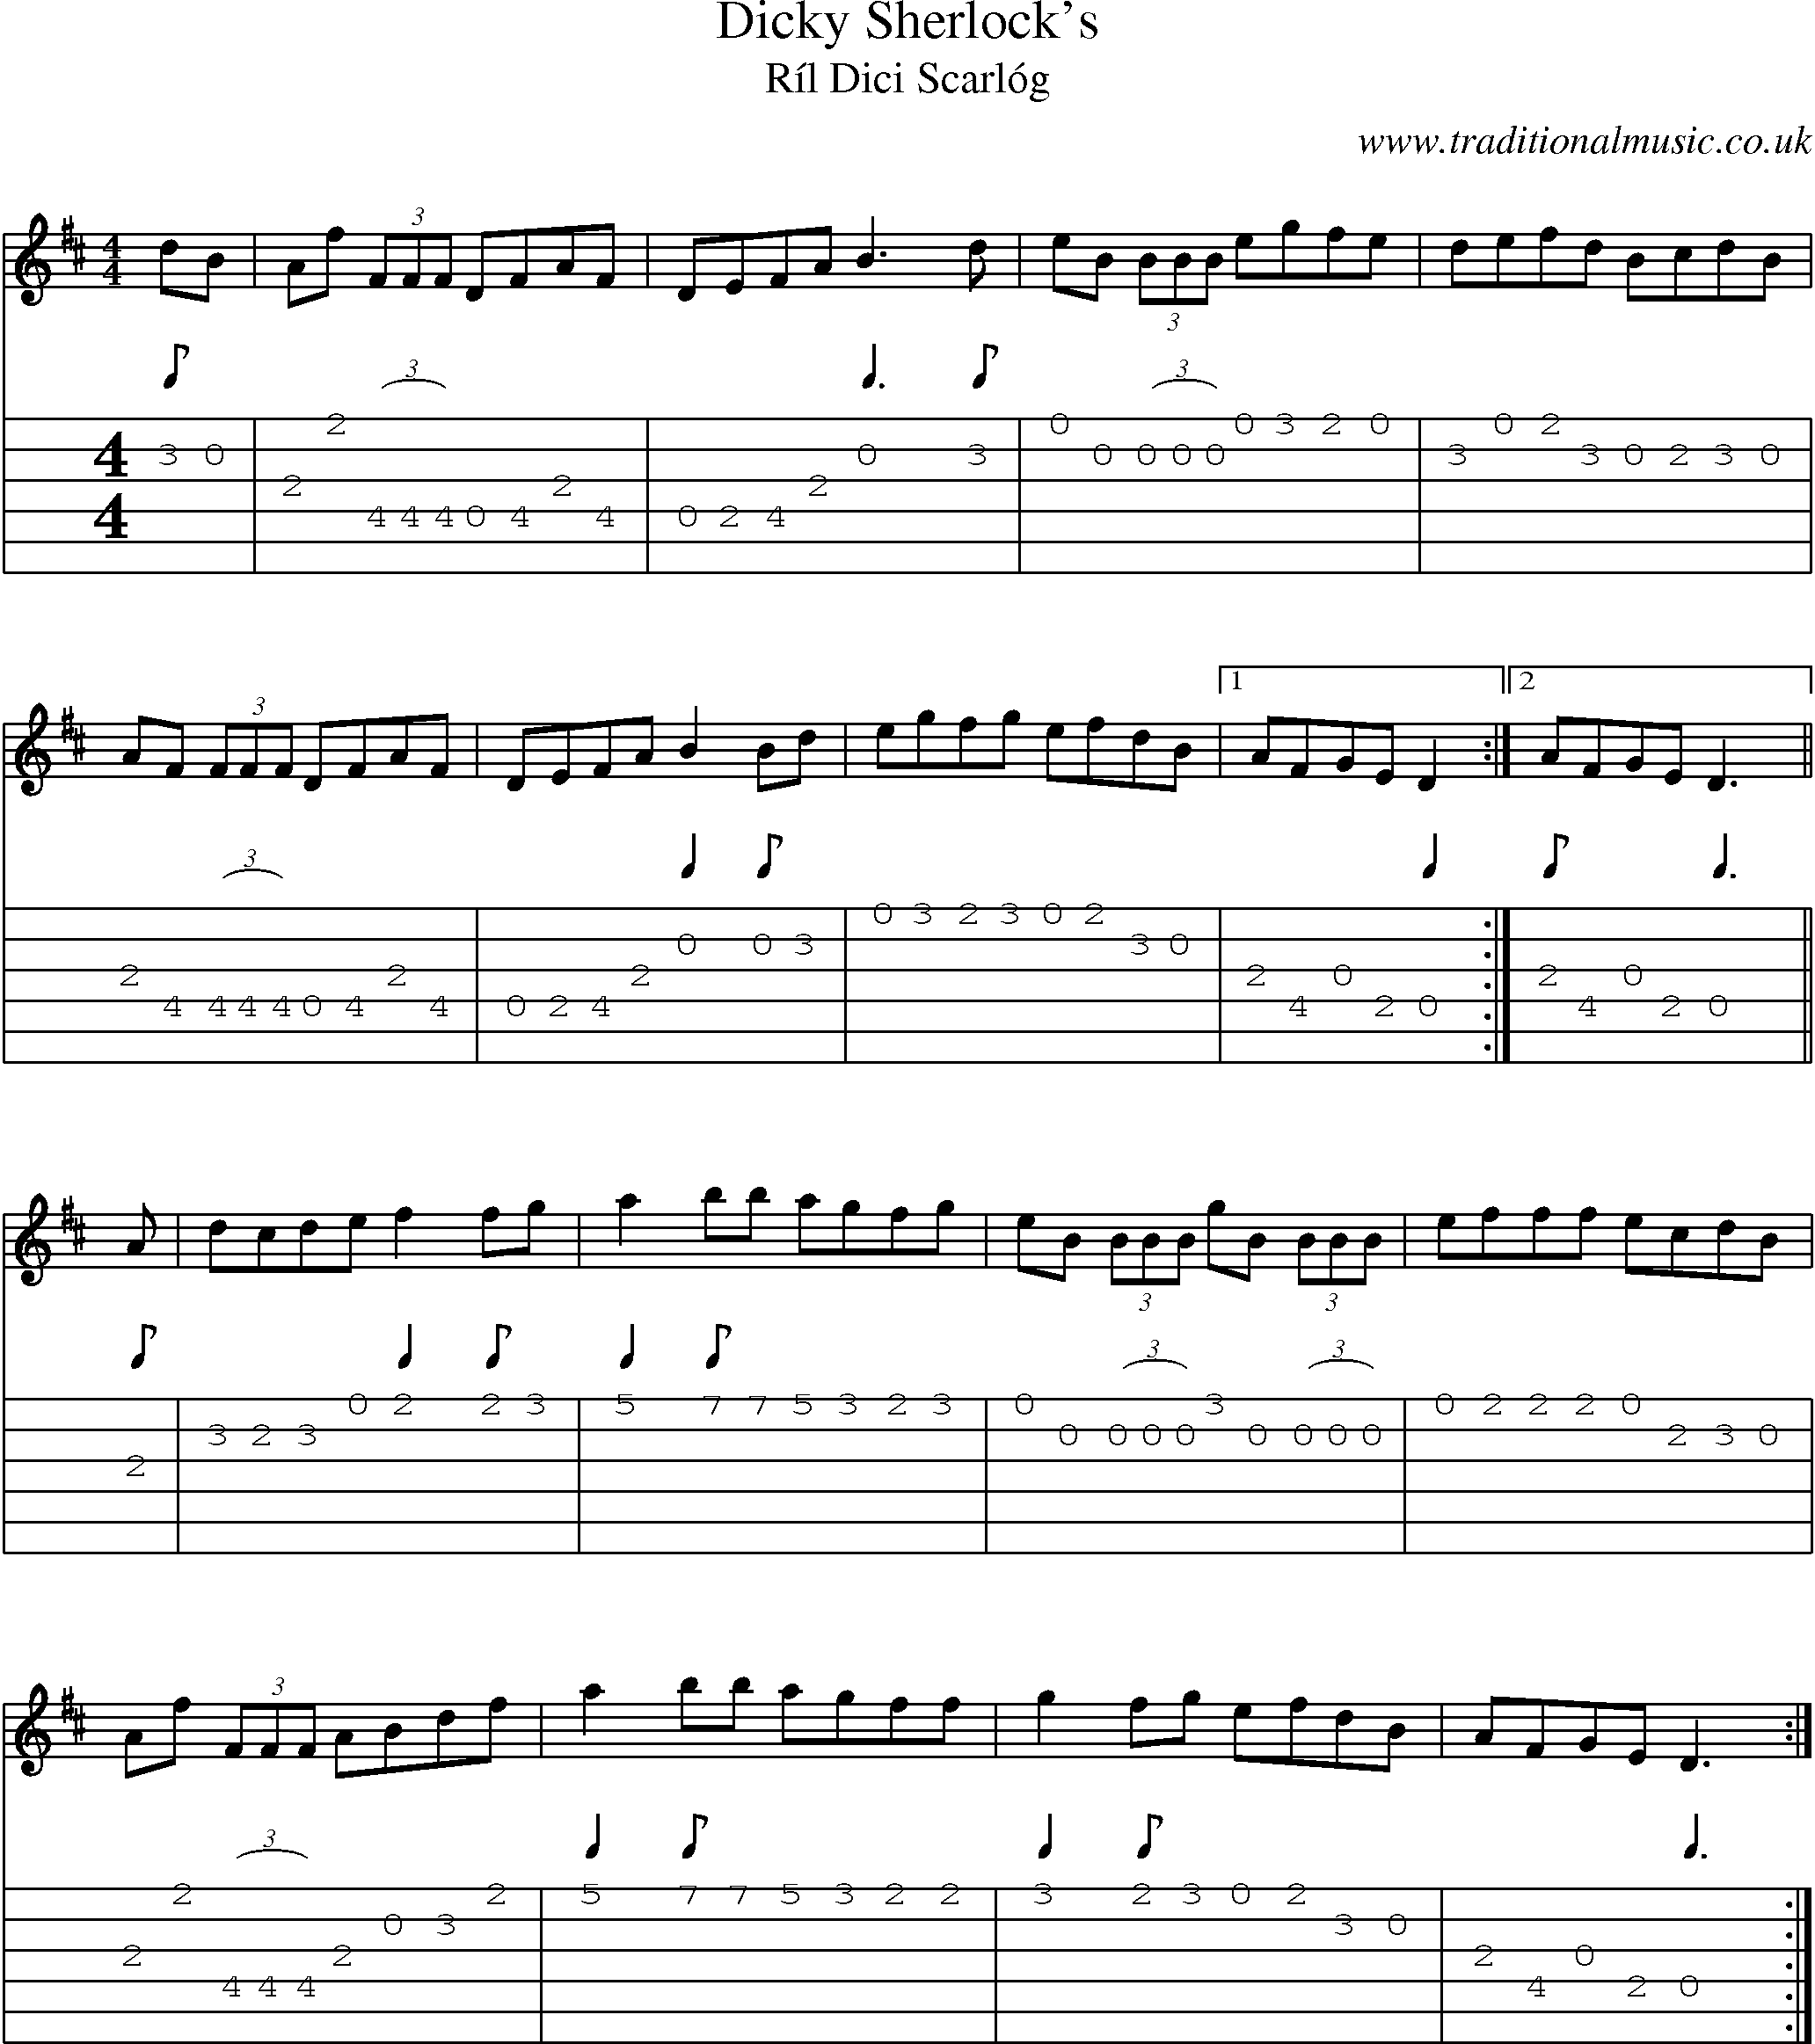 Music Score and Guitar Tabs for Dicky Sherlocks